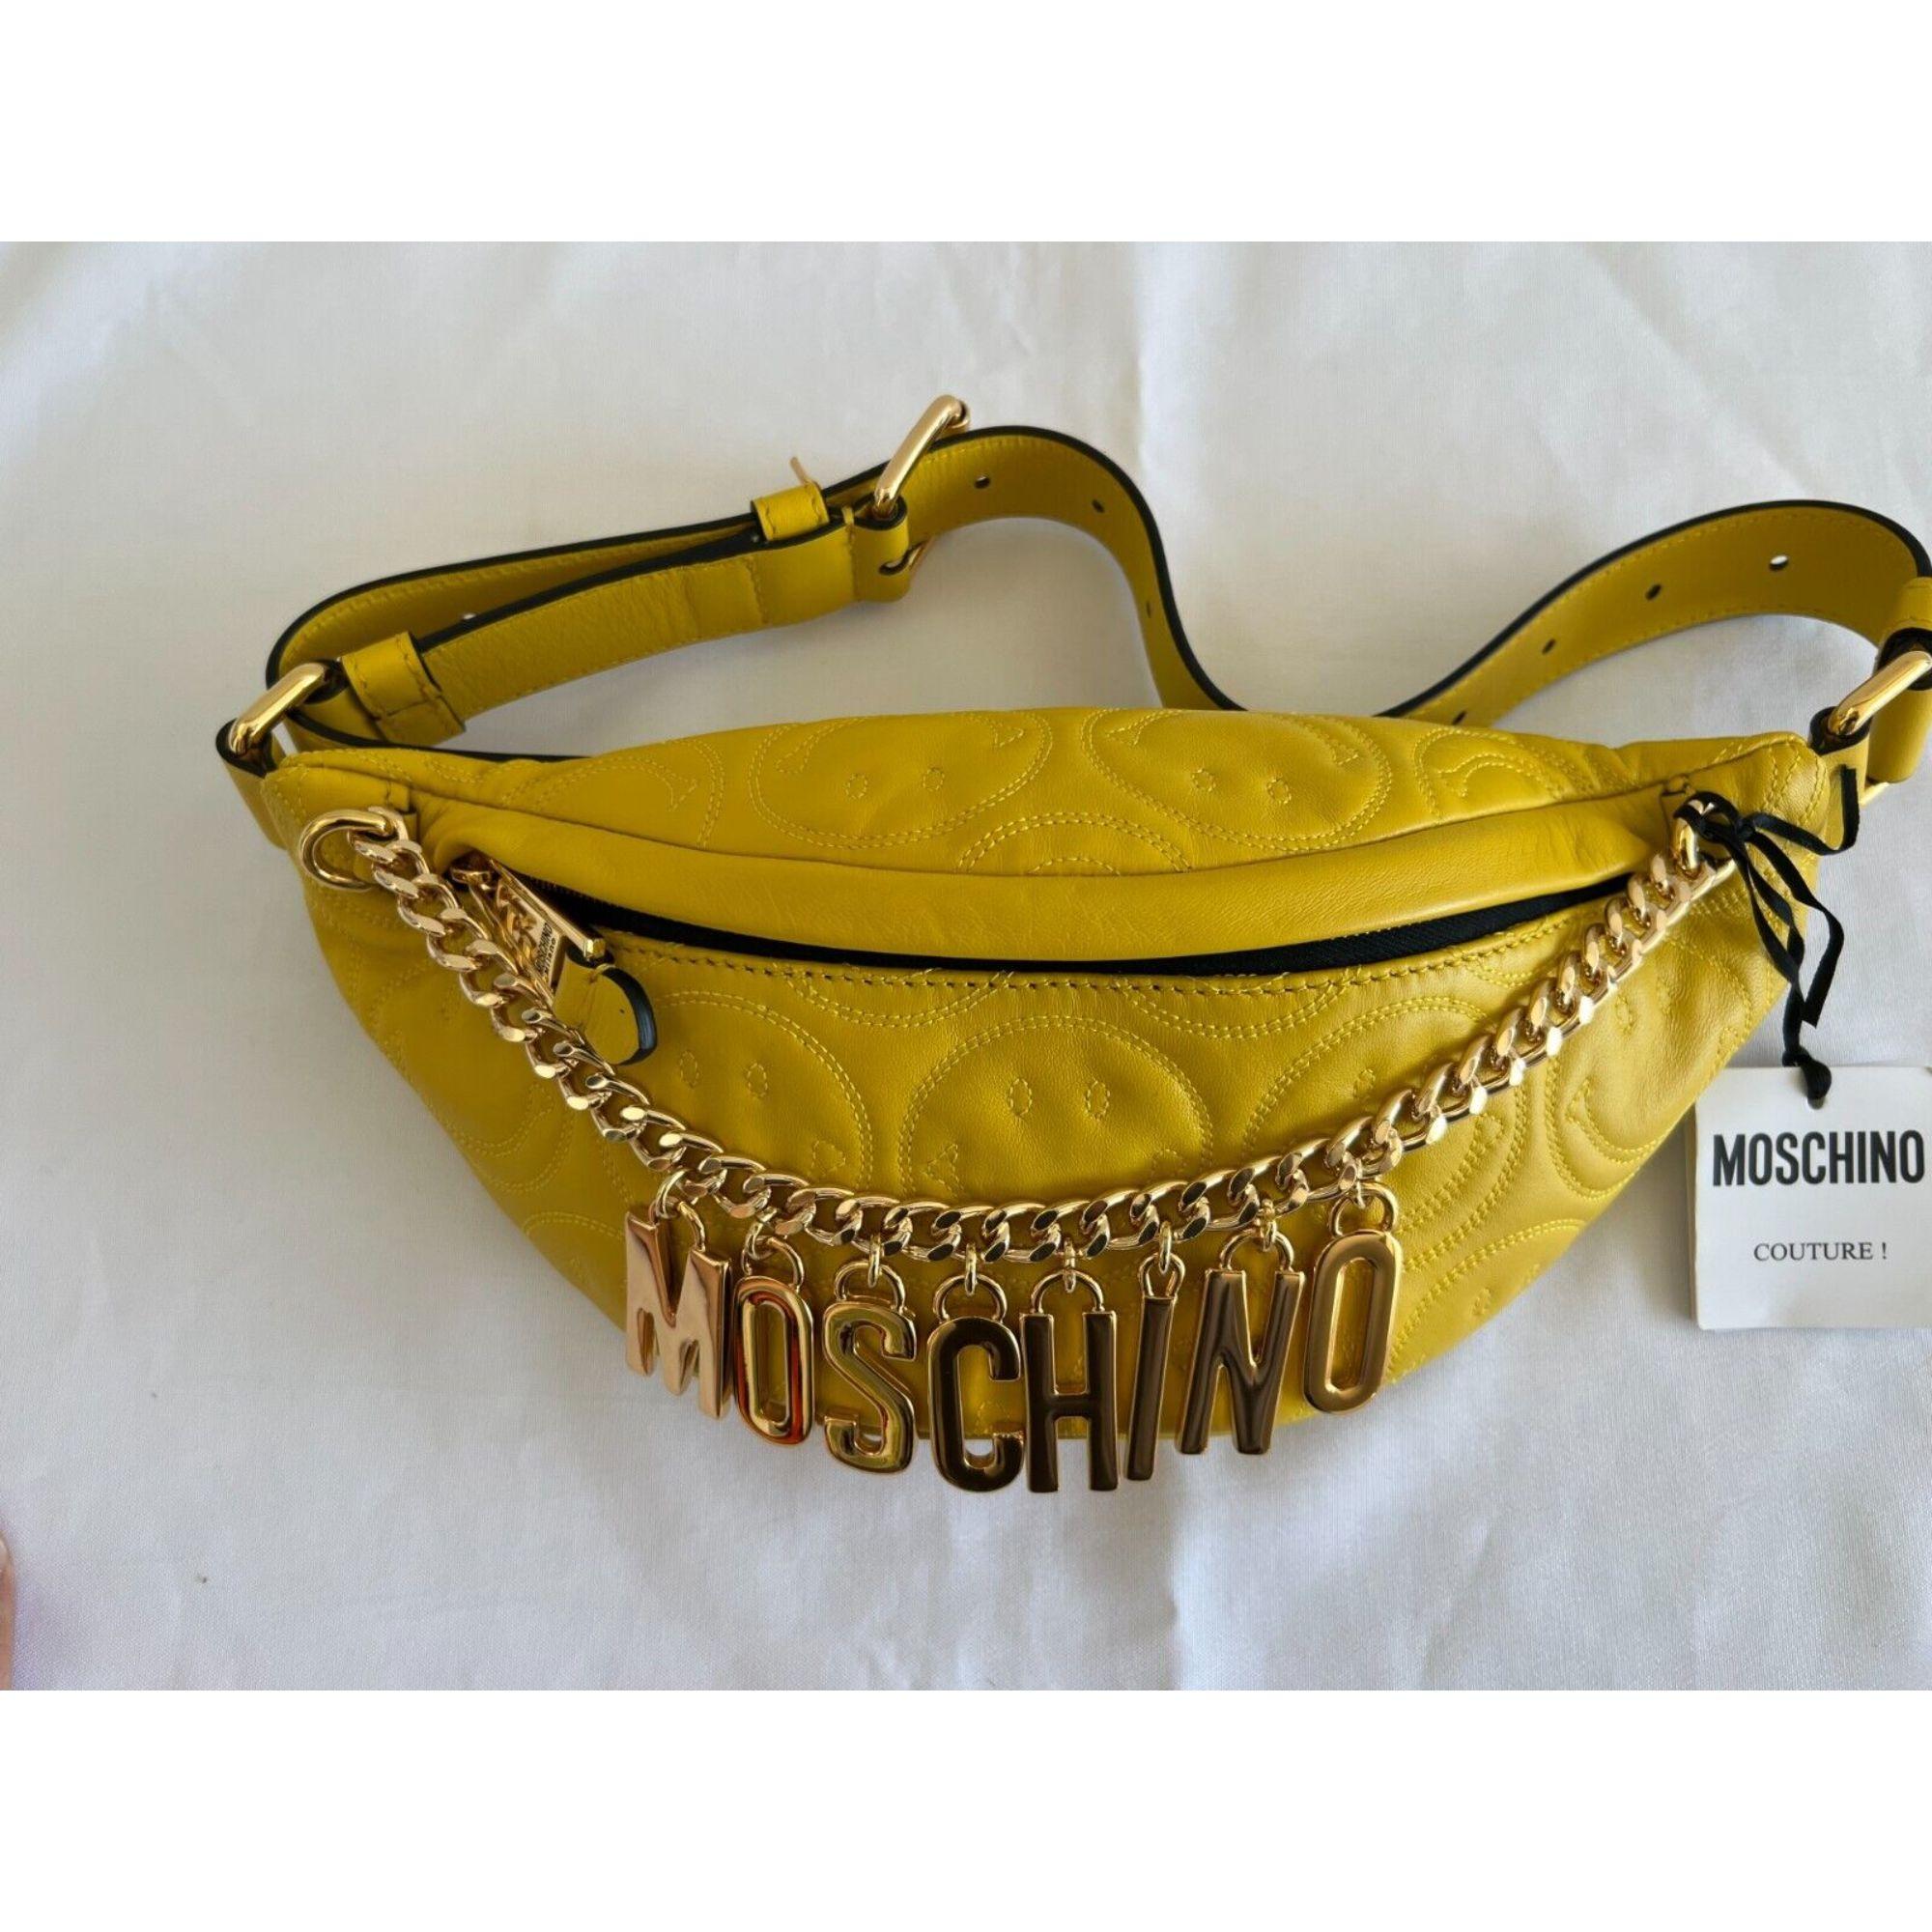 SS21 Moschino Couture Yellow Fanny Pack with Engraved Smiley by Jeremy Scott For Sale 7